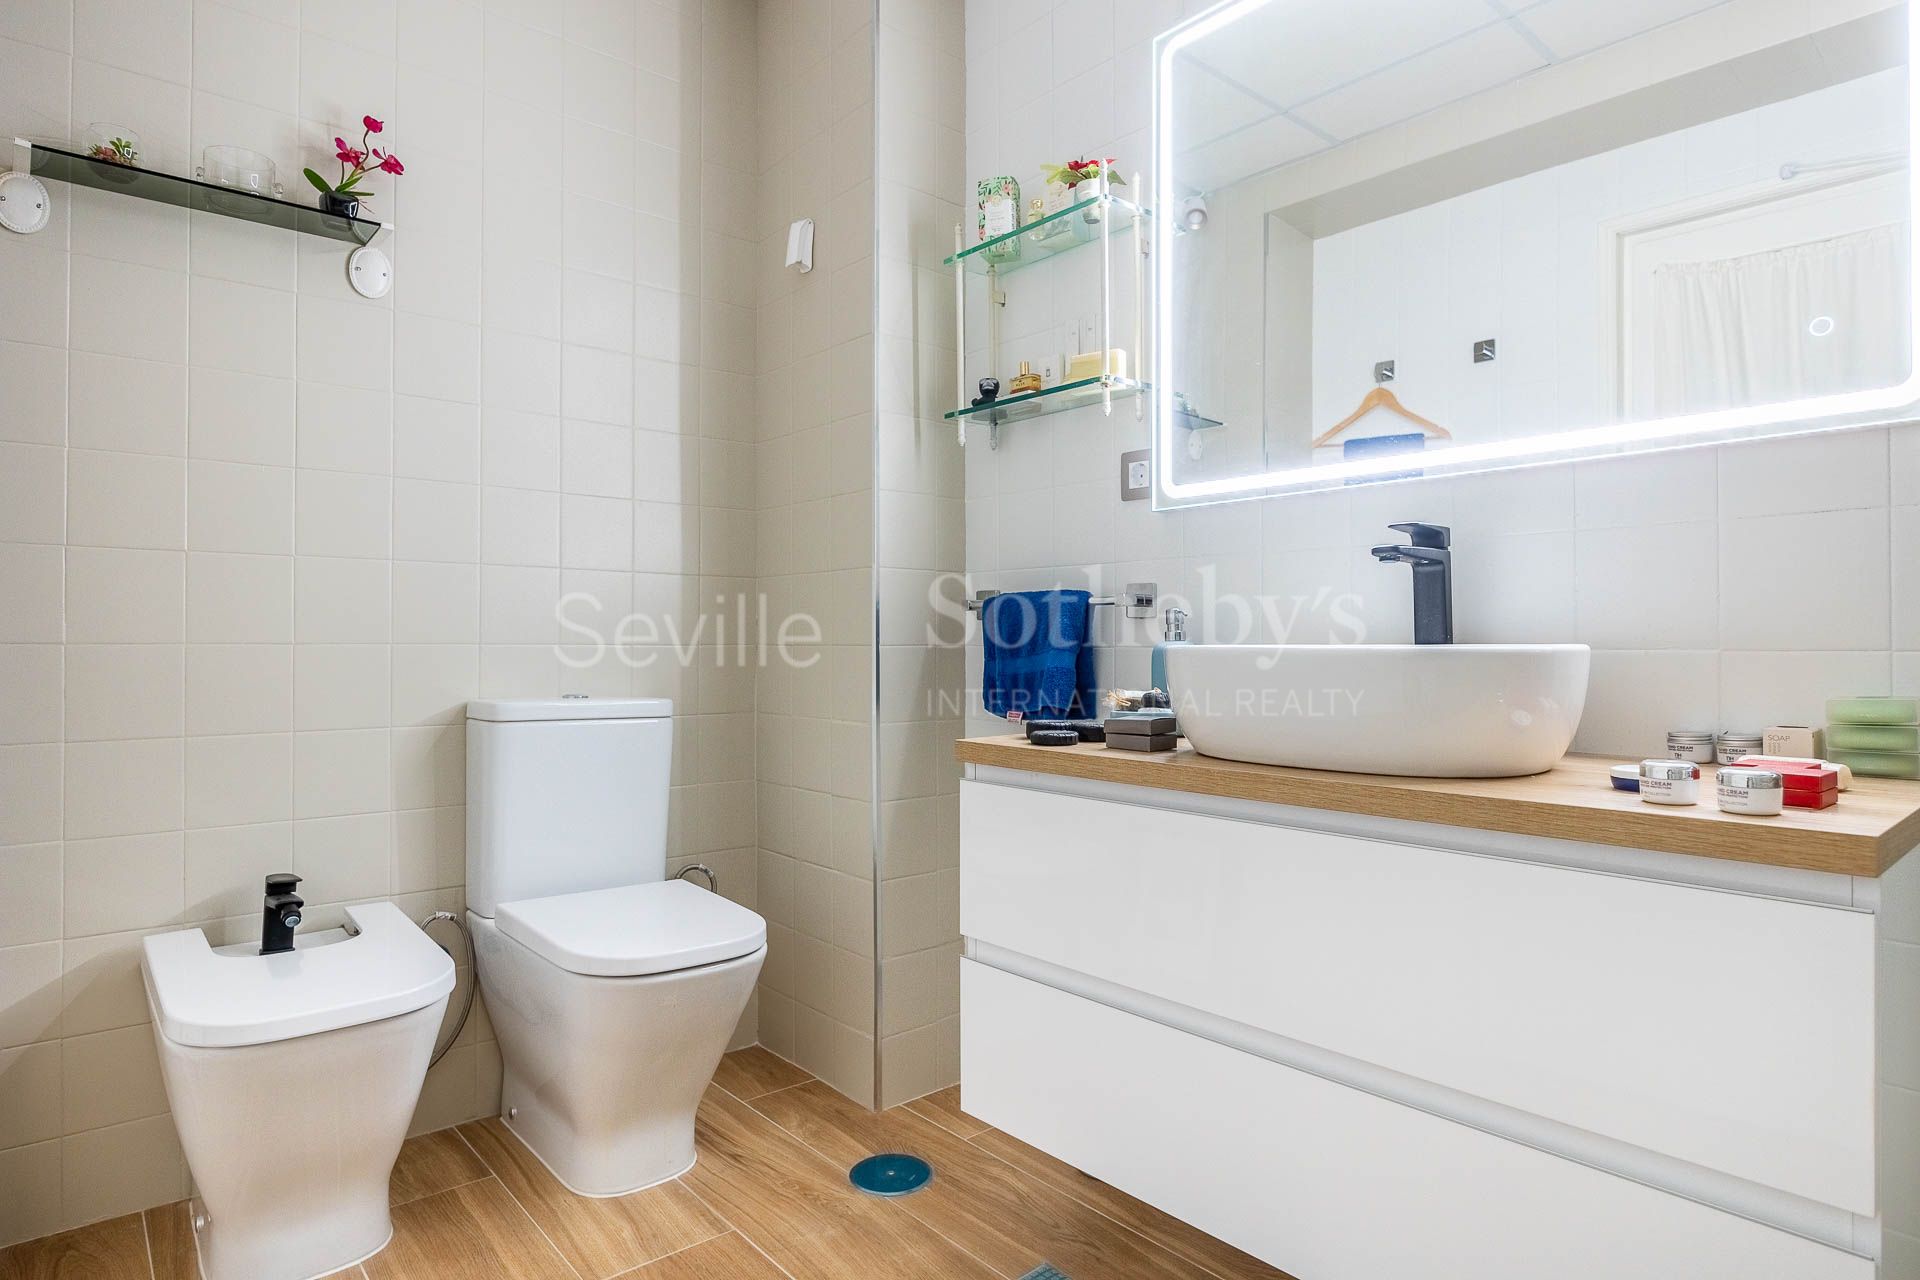 Exclusive 367-square-meter apartment in one of most sought-after areas of Seville